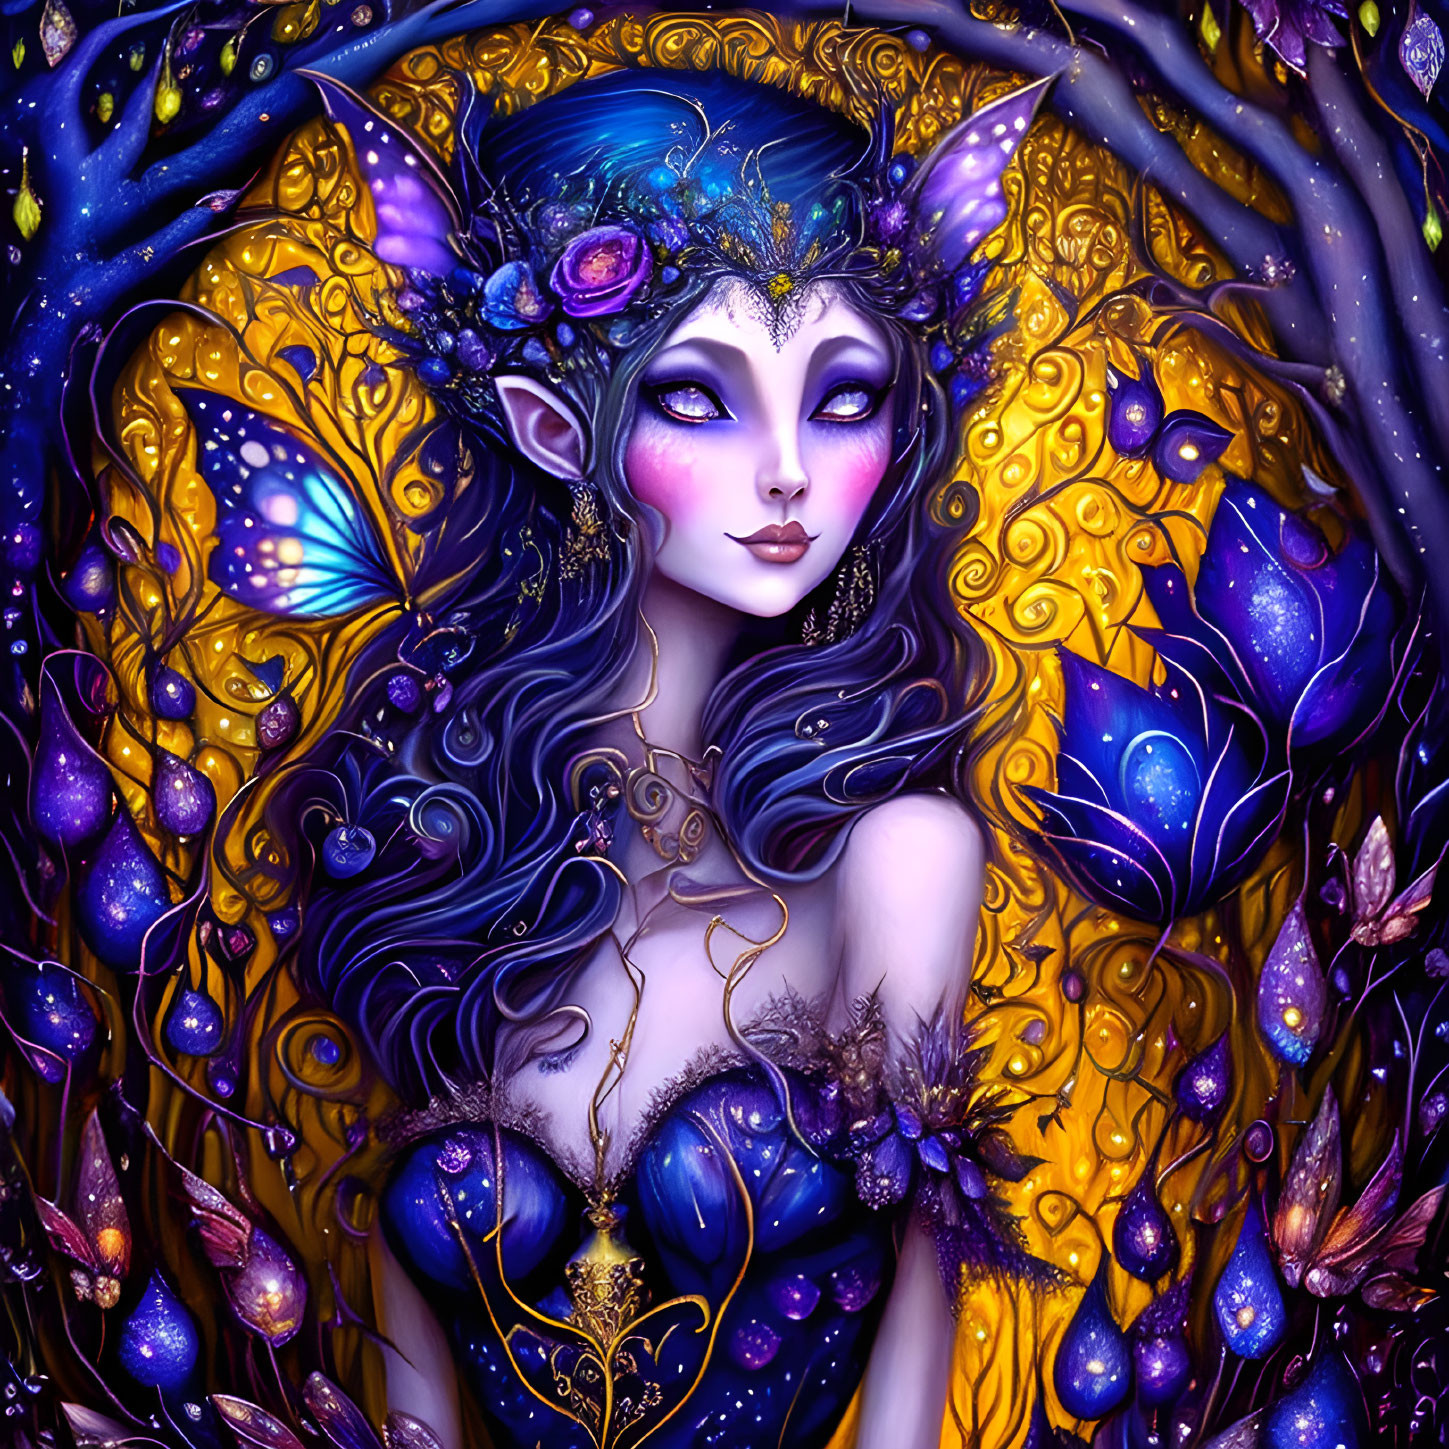 Fantasy illustration of mystical female figure with purple skin and pointed ears surrounded by butterflies and foliage